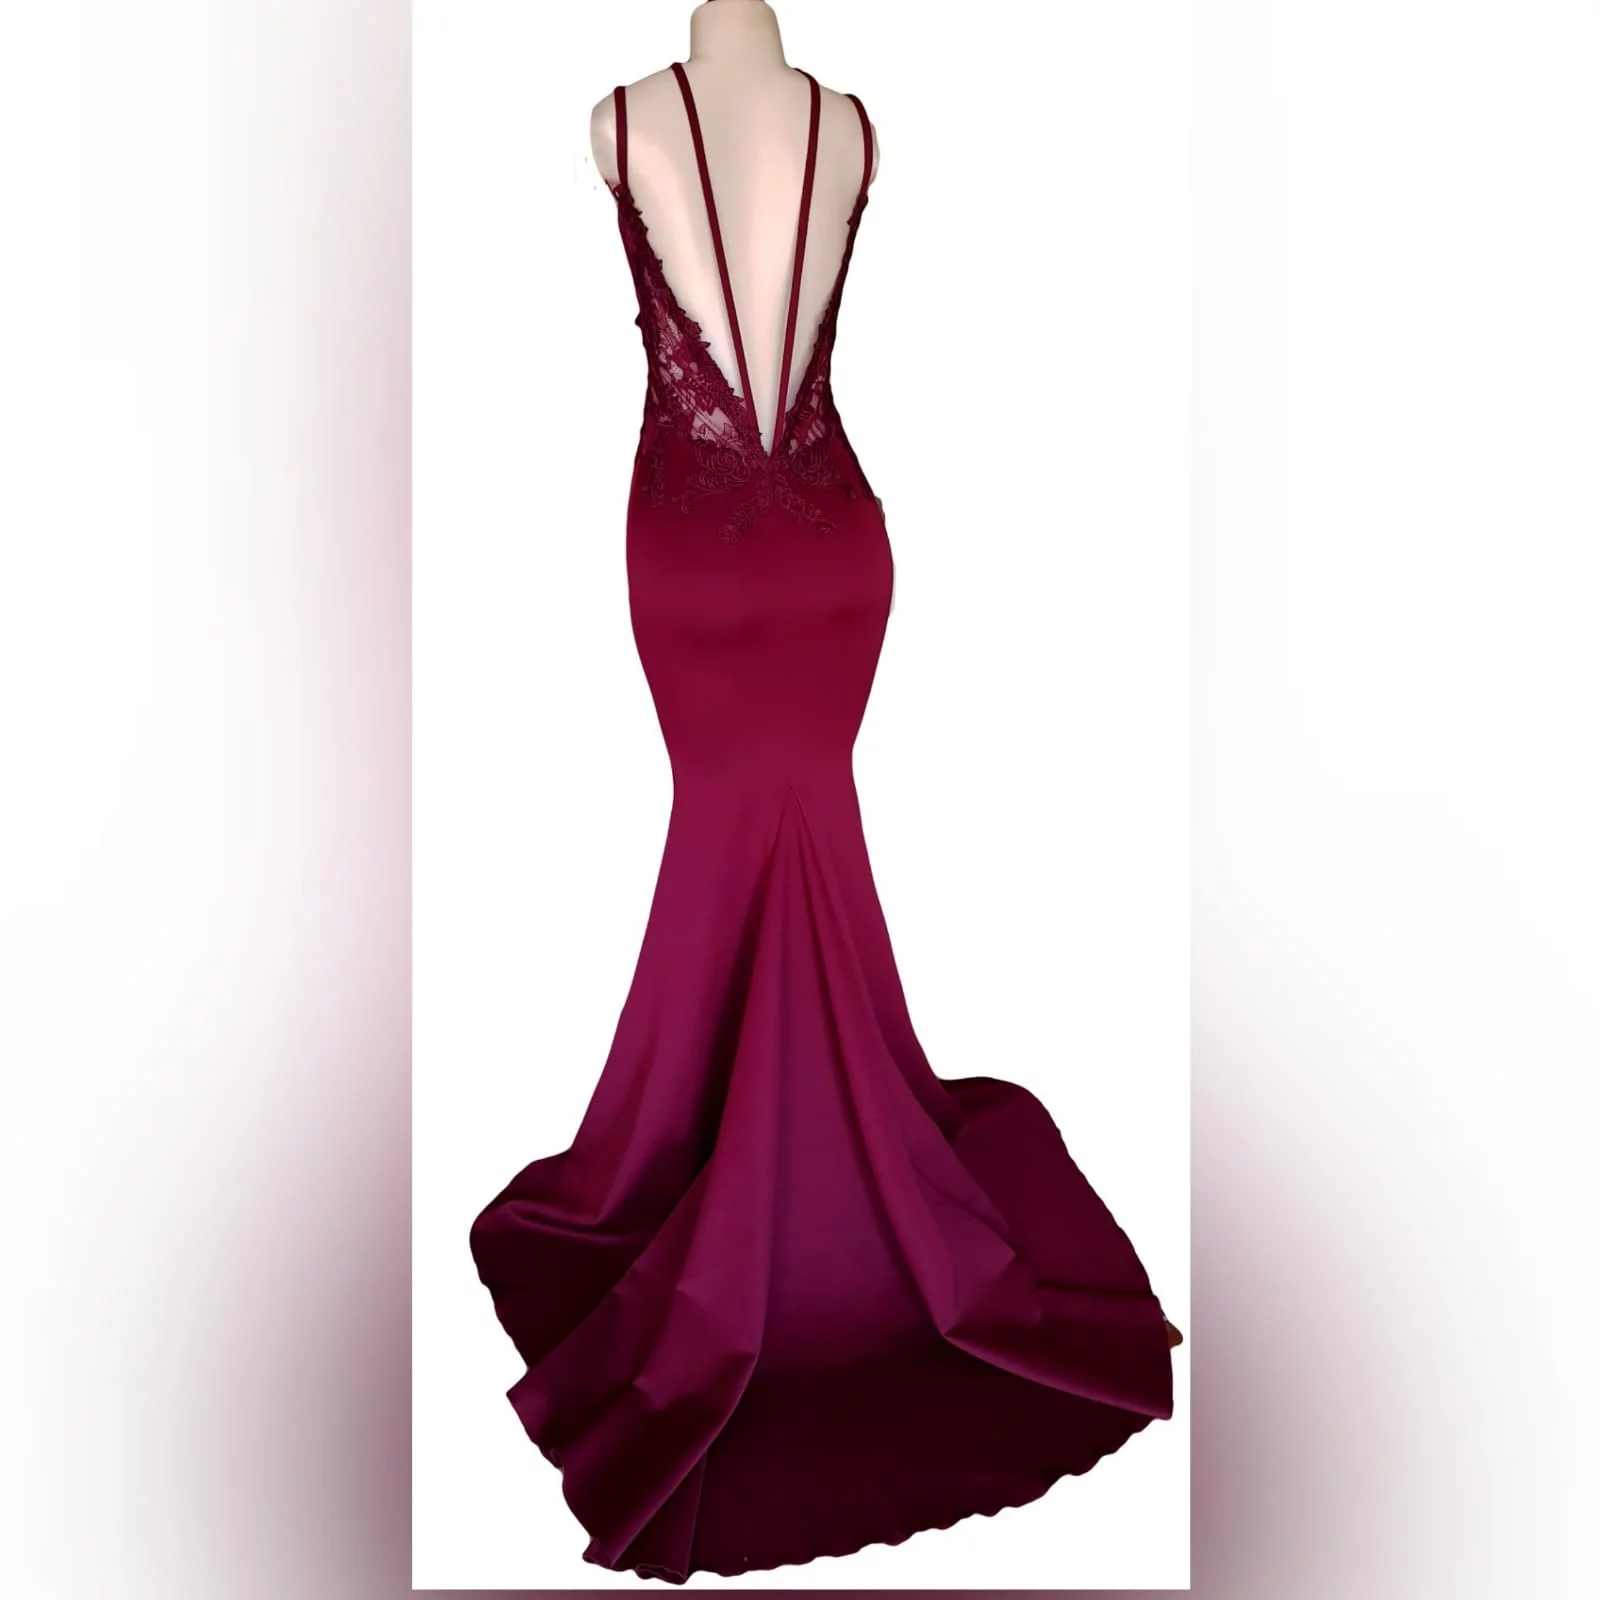 Burgundy soft mermaid sexy elegant matric dance dress 4 burgundy soft mermaid sexy elegant matric dance dress. With an illusion lace bodice with deep v neckline, low open v back with strap detail, with a train